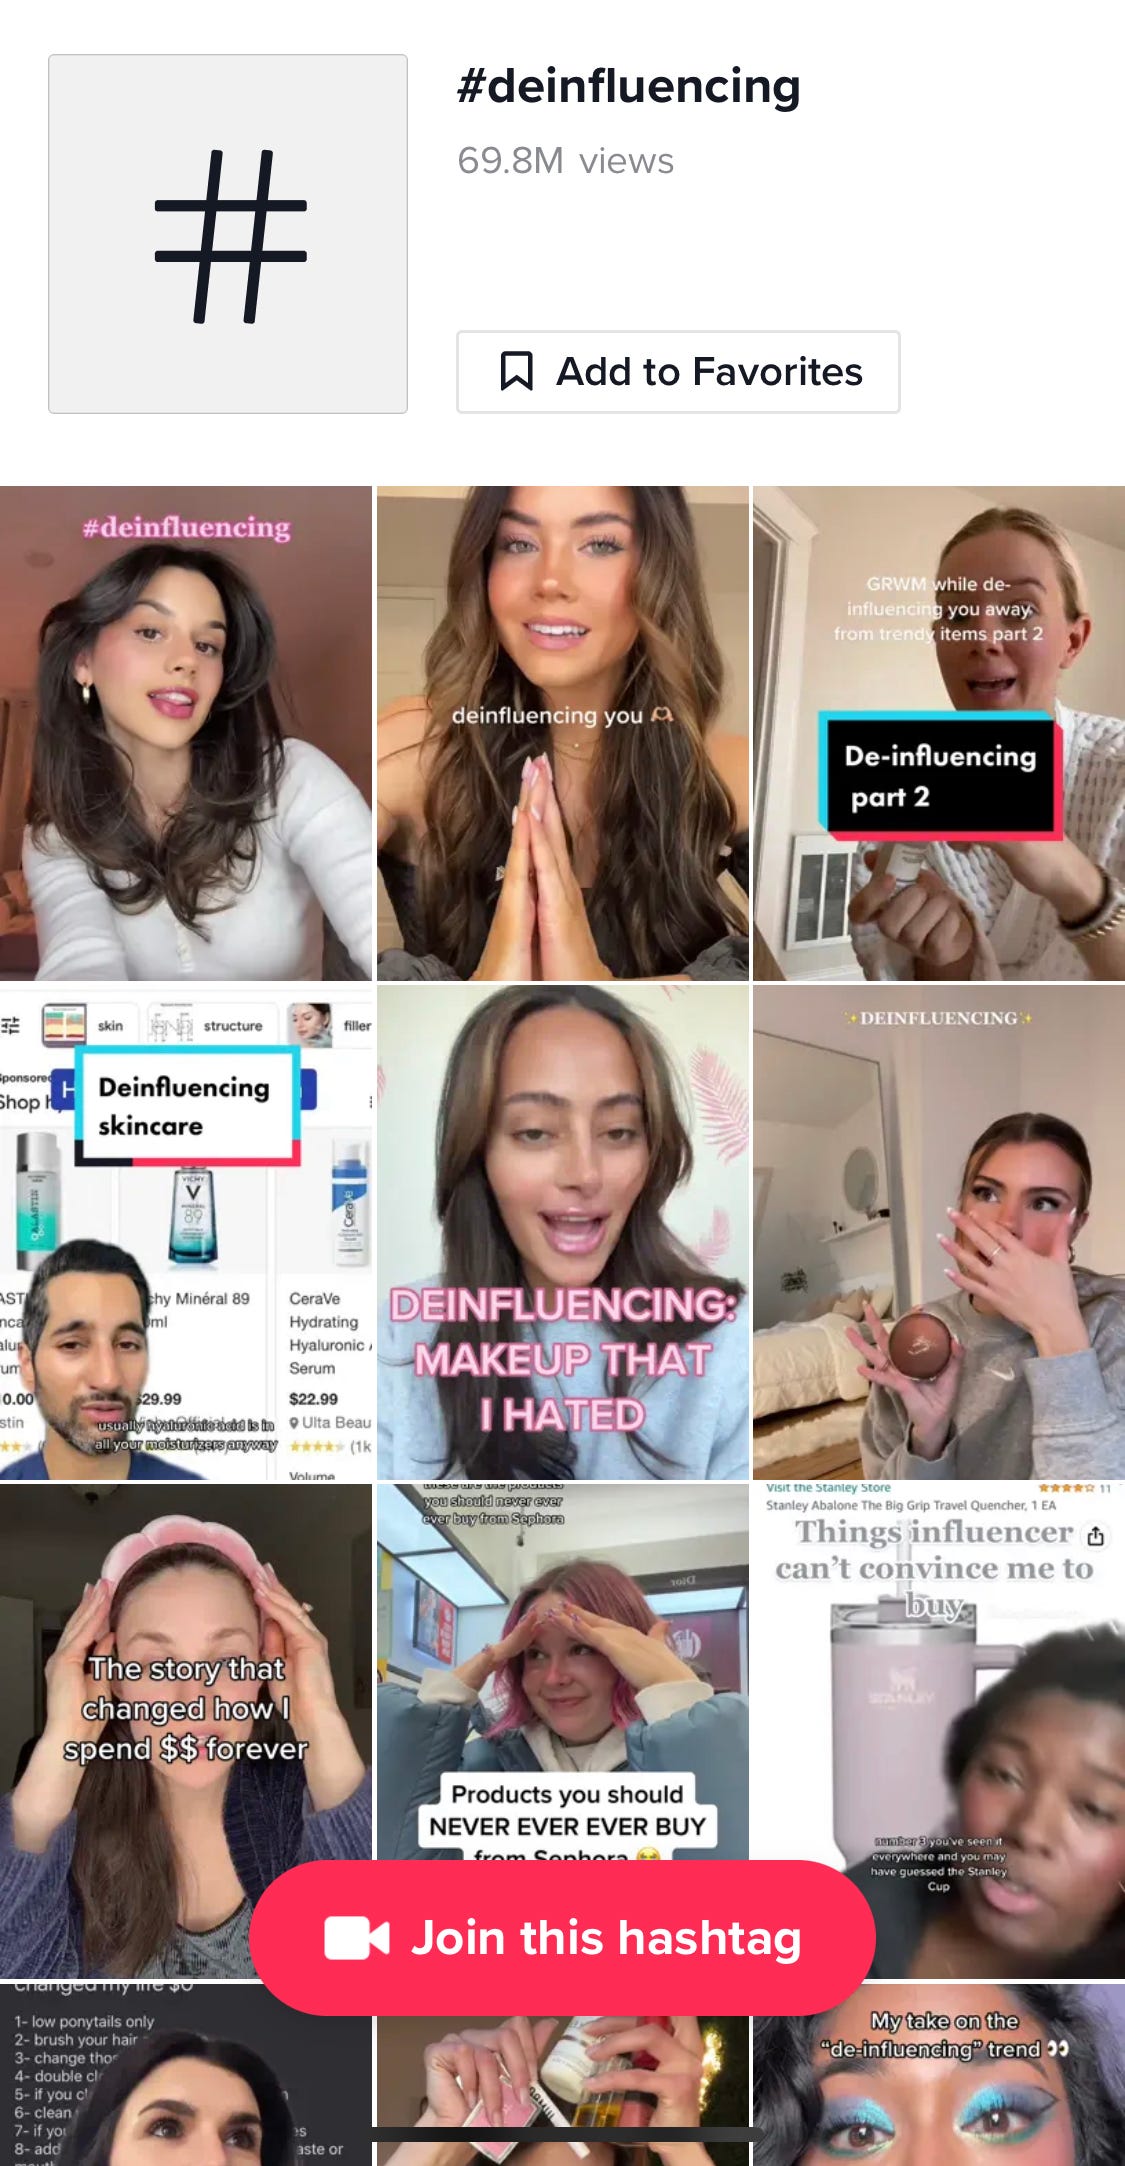 a look at TikTok's deinfluencing hashtag which has 69.8 million views to date